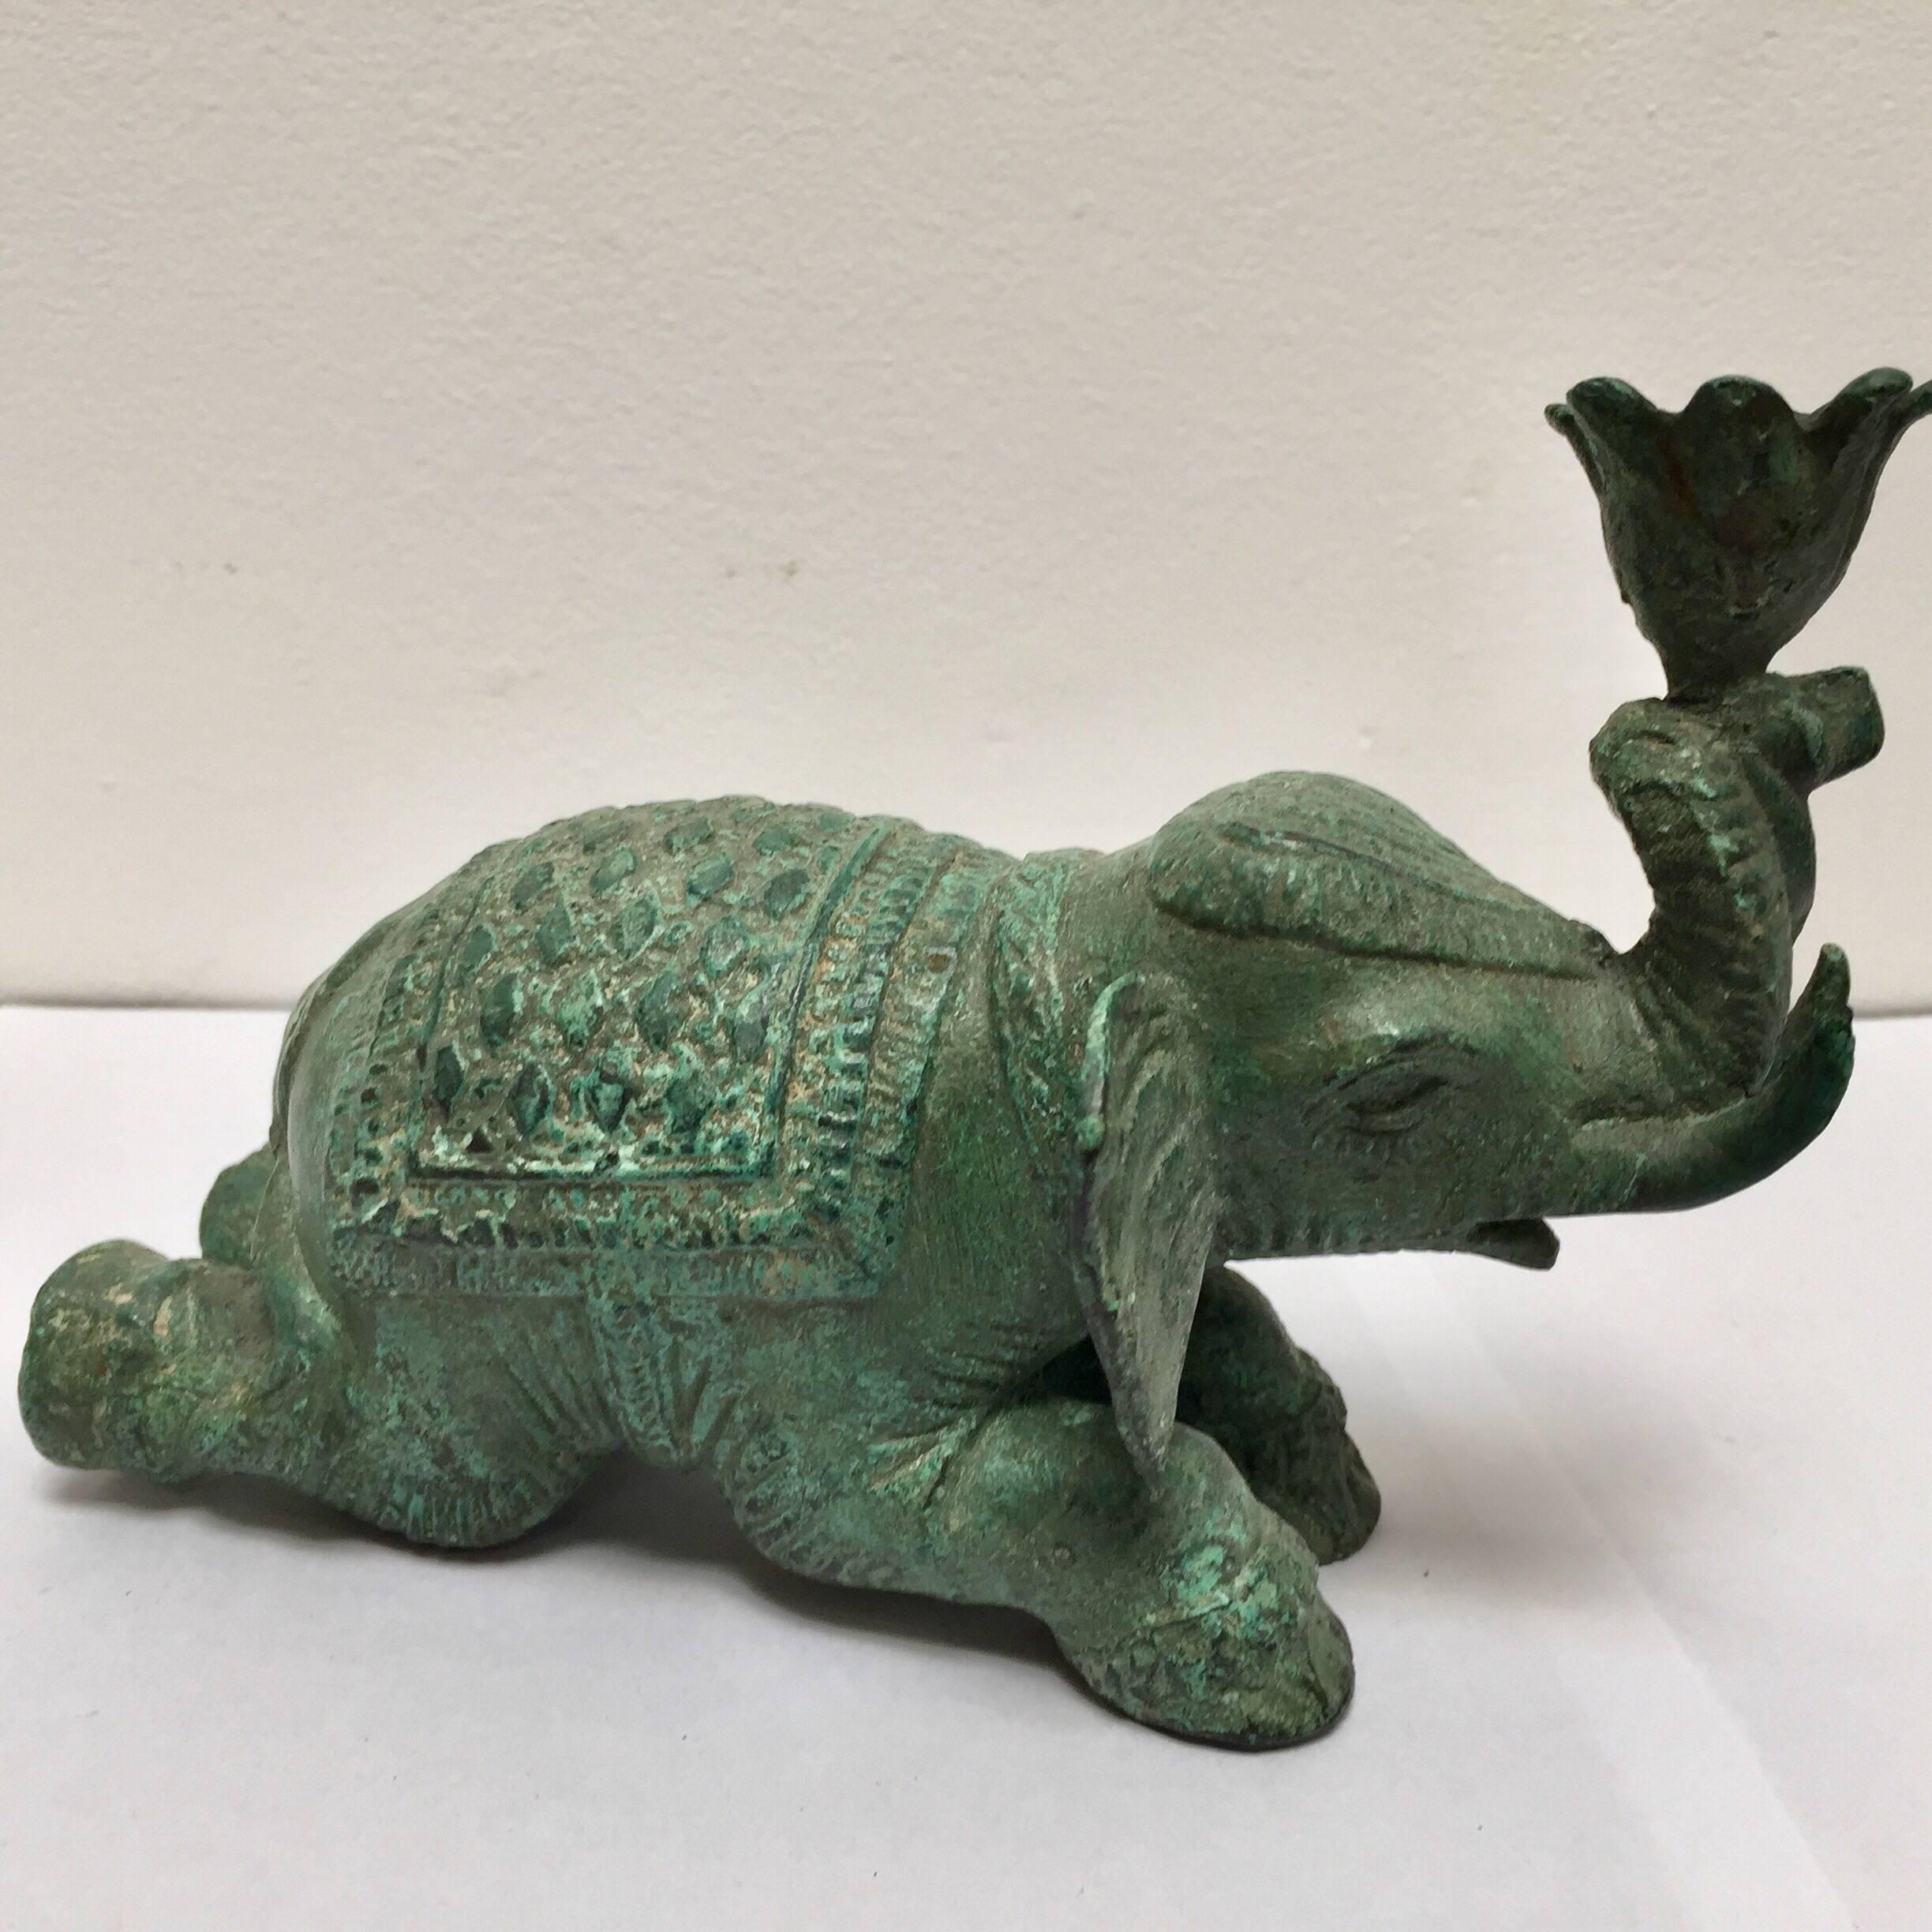 Rajasthani elephant metal sculpture, green bronzed patinated look nicely detailed.
The elephant is shown lying, wearing a ceremonial south Indian patterned blanket on his back as well as decorative florets on his head.
His trunk is up and holding